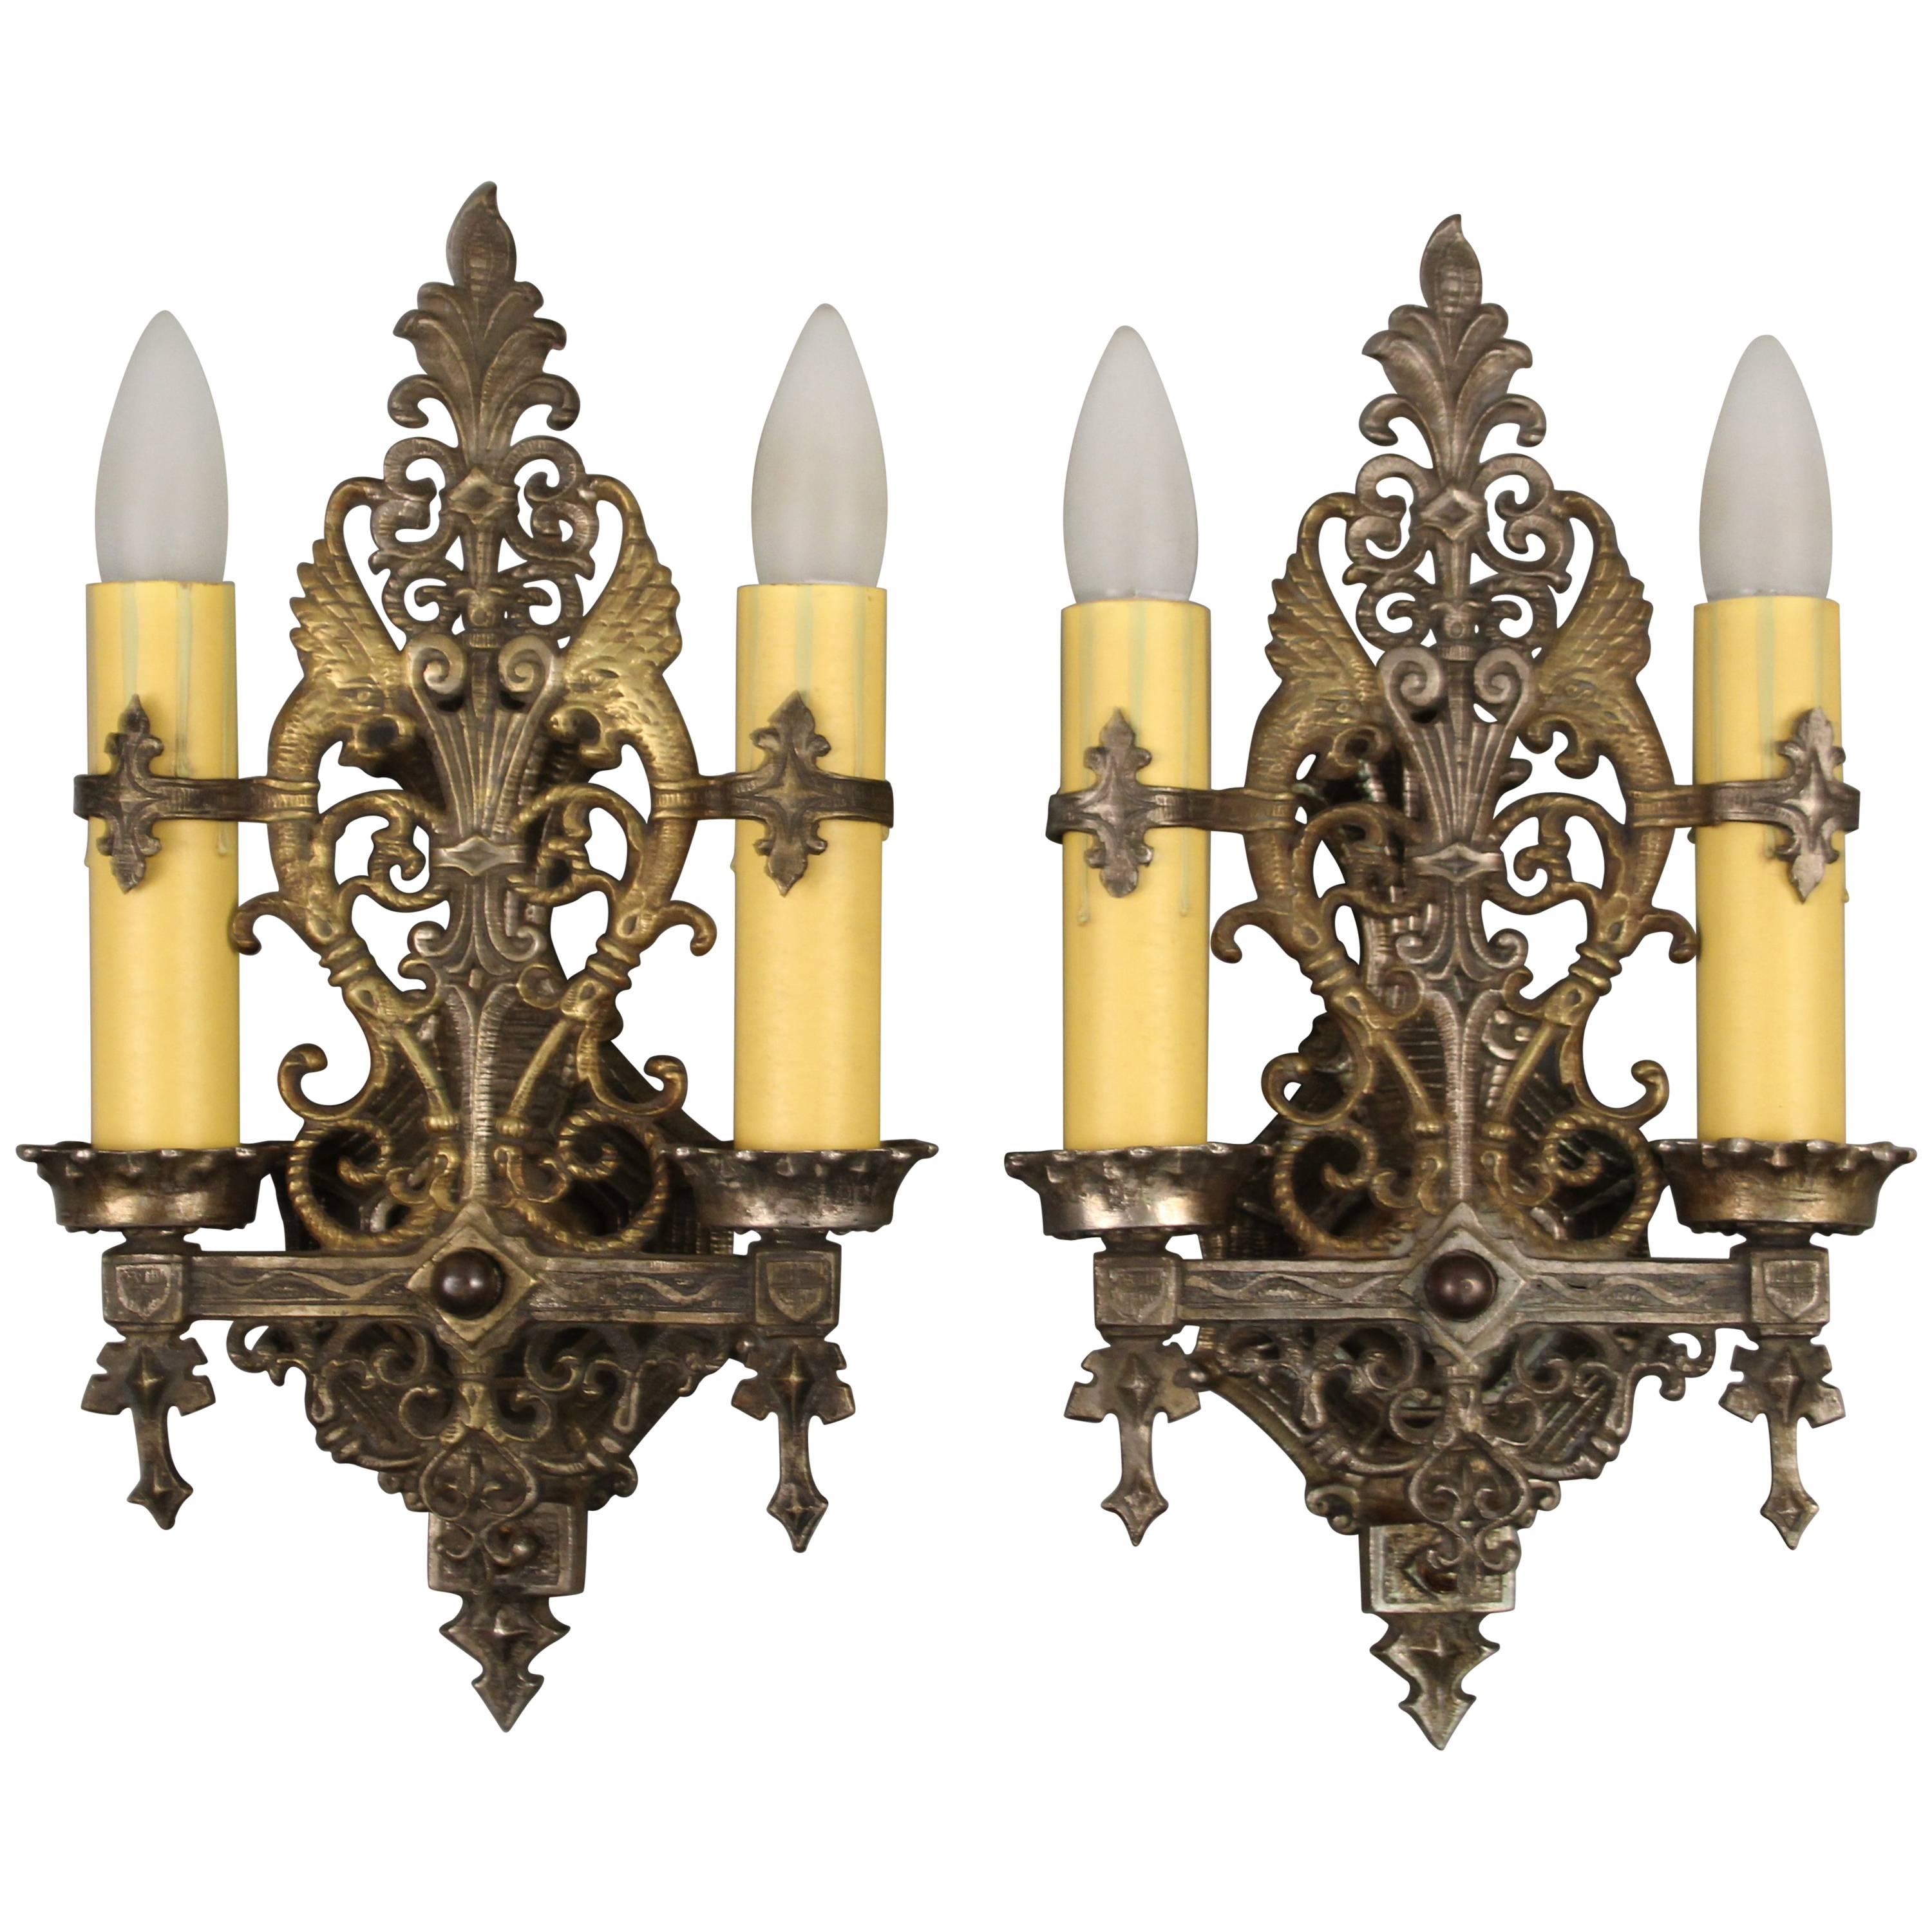 Antique Pair of 1920s Double Sconces with Dragon Motif and Original Finish